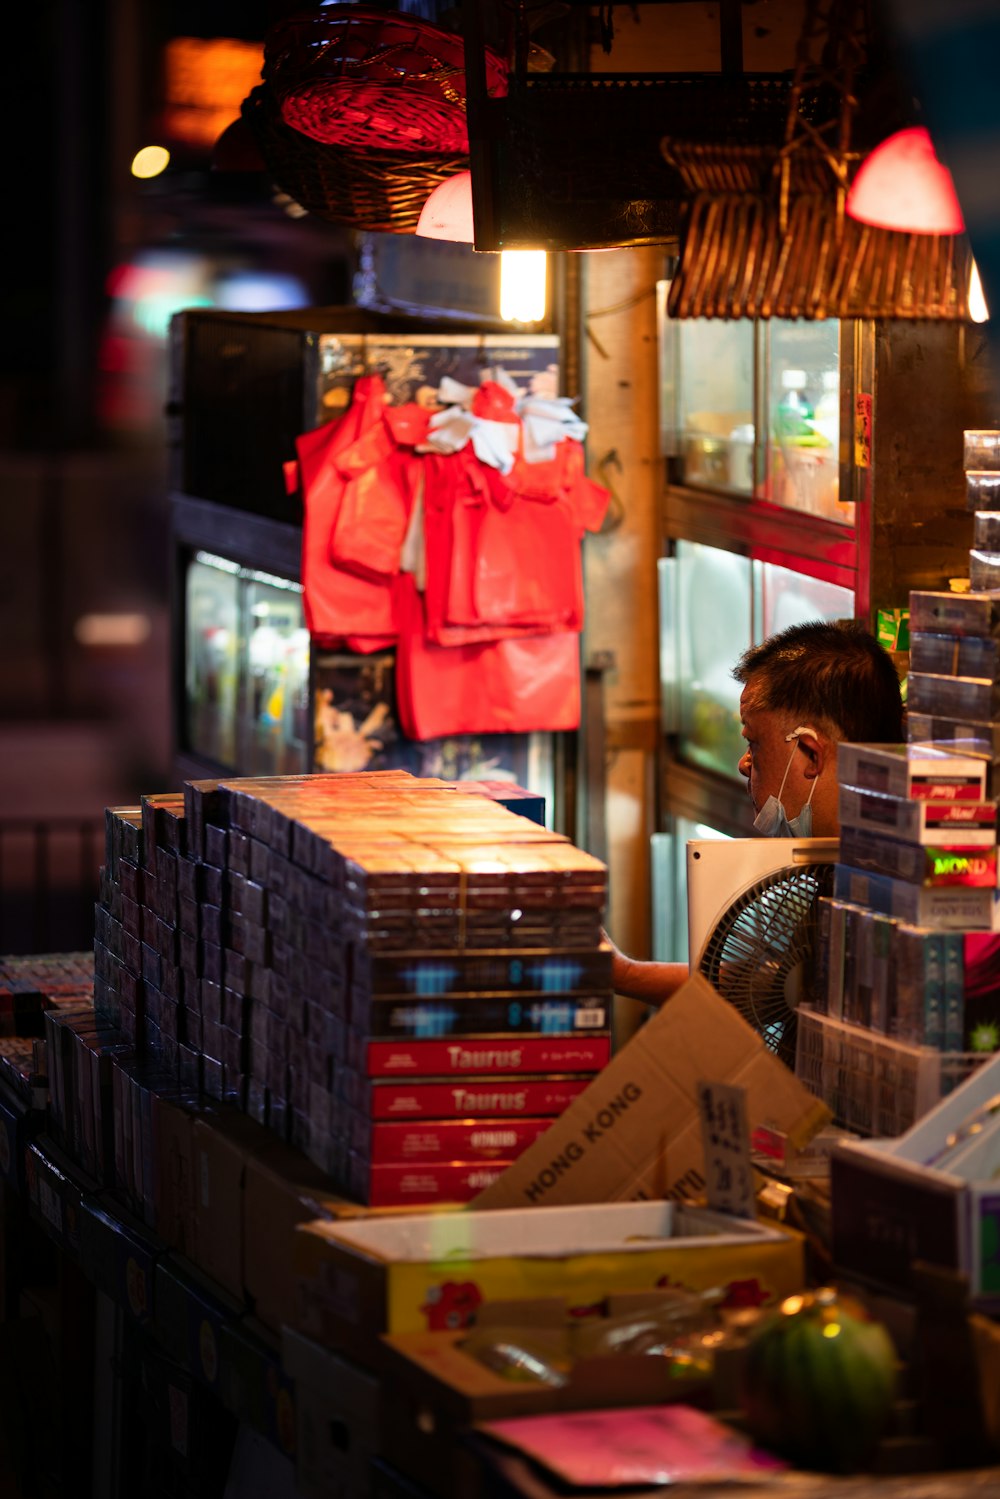 a man sitting in front of a store filled with books